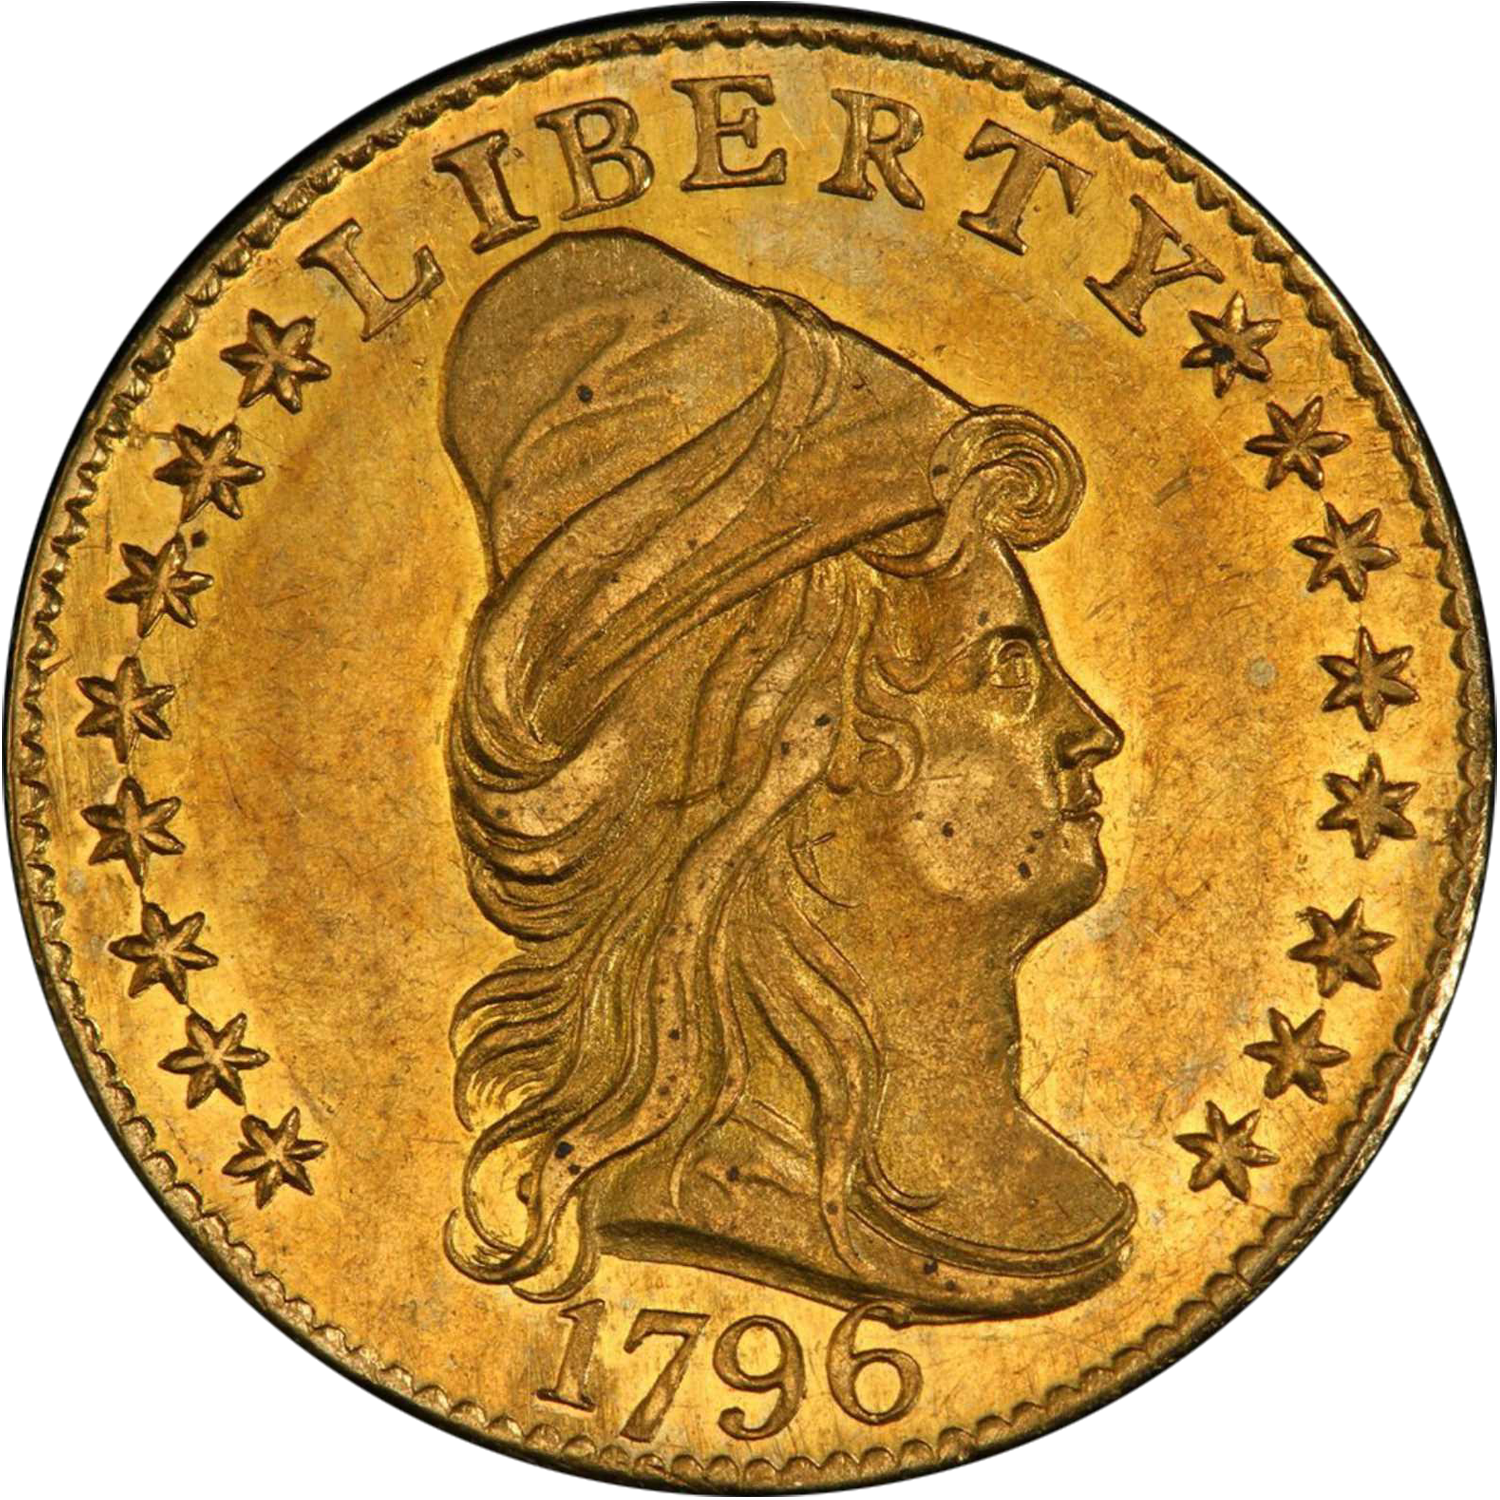 1796 capped bust right $2.50 eagle with stars